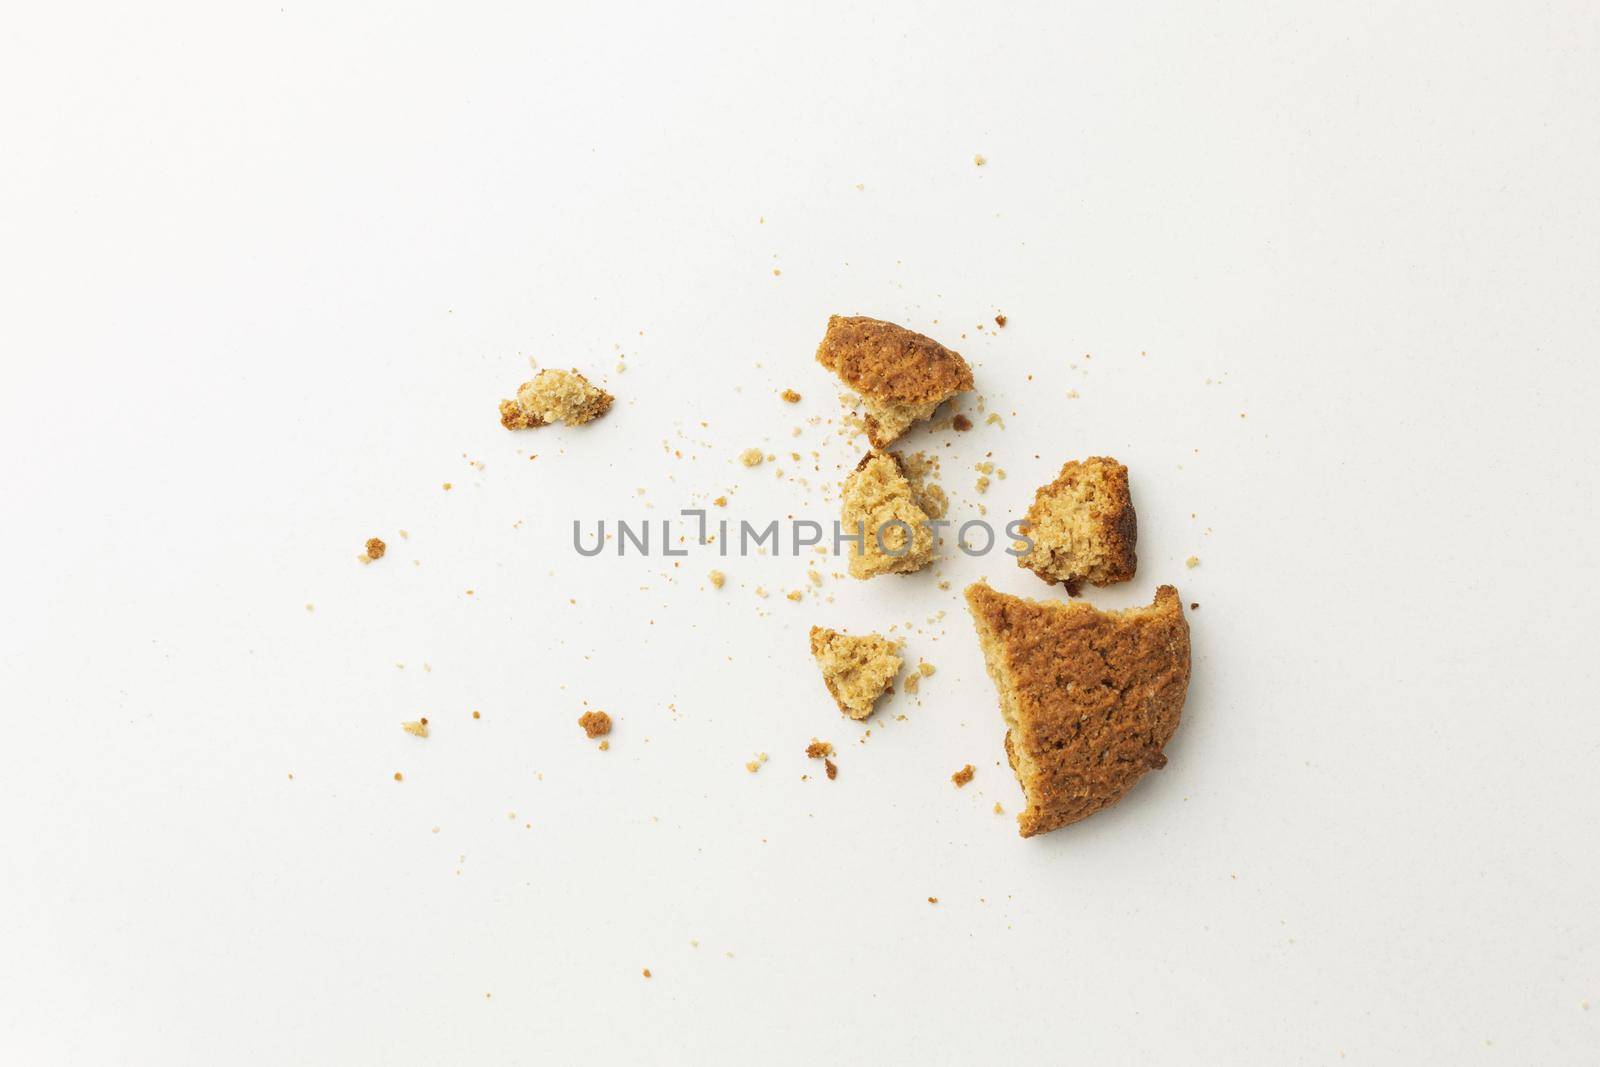 leftover food waste crumbs. High quality beautiful photo concept by Zahard